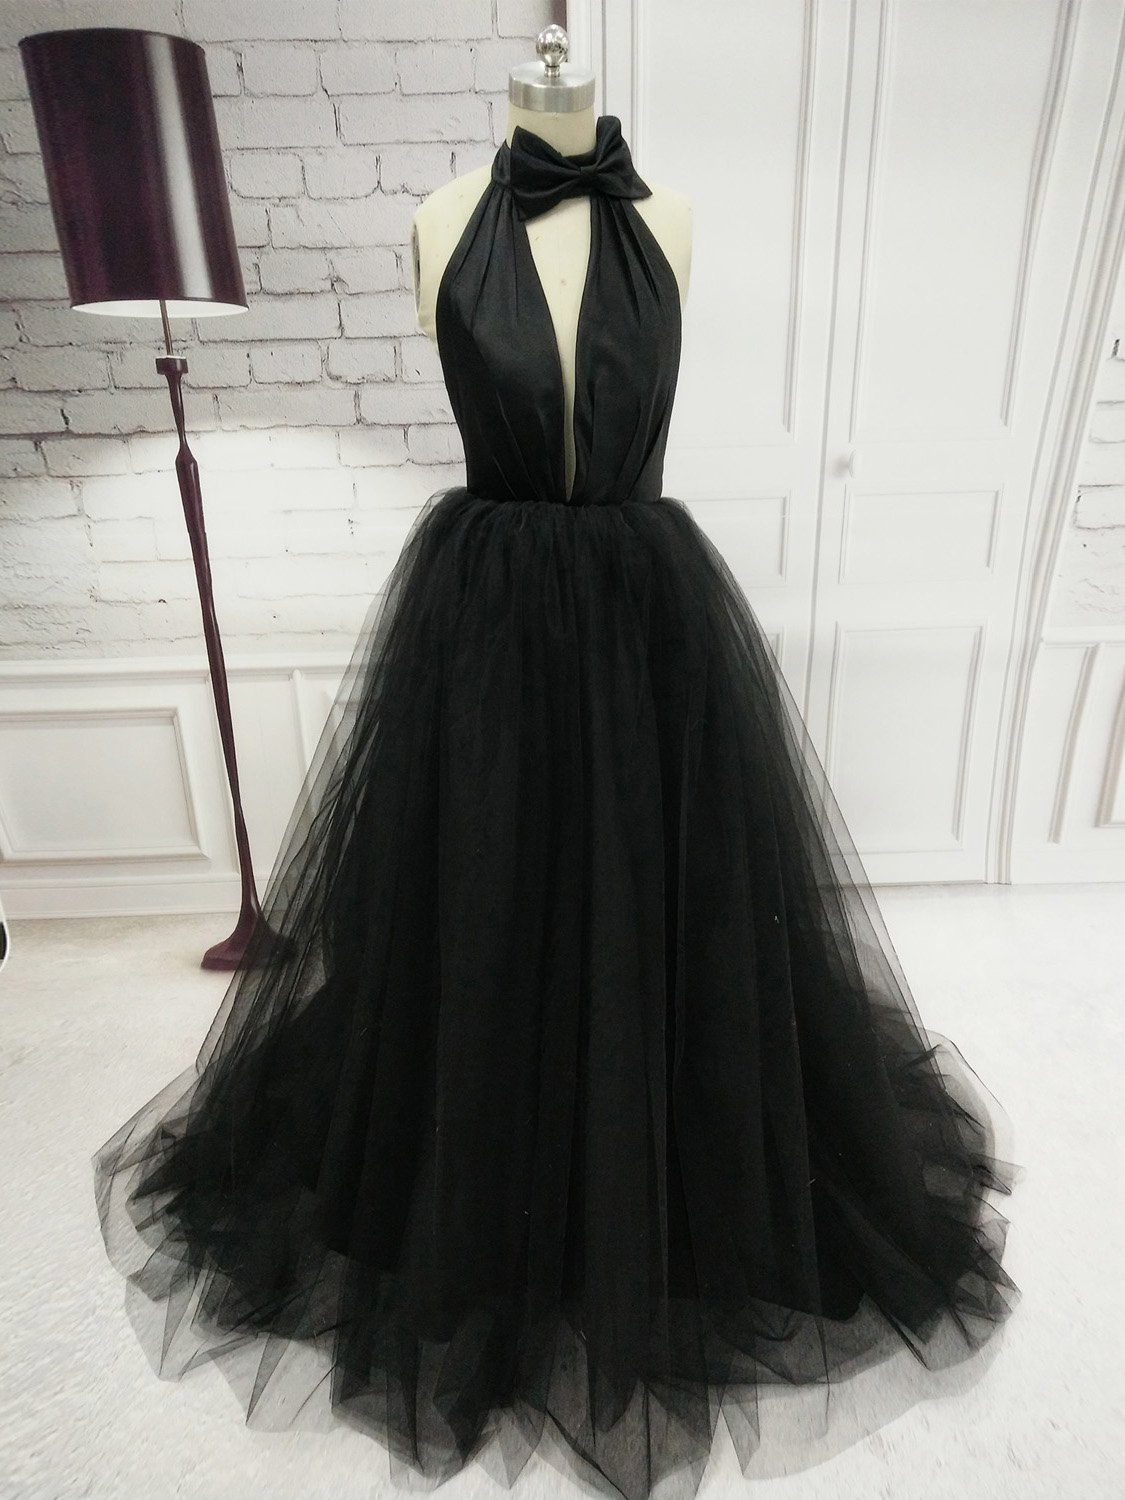 Elegant Black Halter Long Tulle Prom Dress,backless Bowknot Evening Dress,fashion Ball Gowns